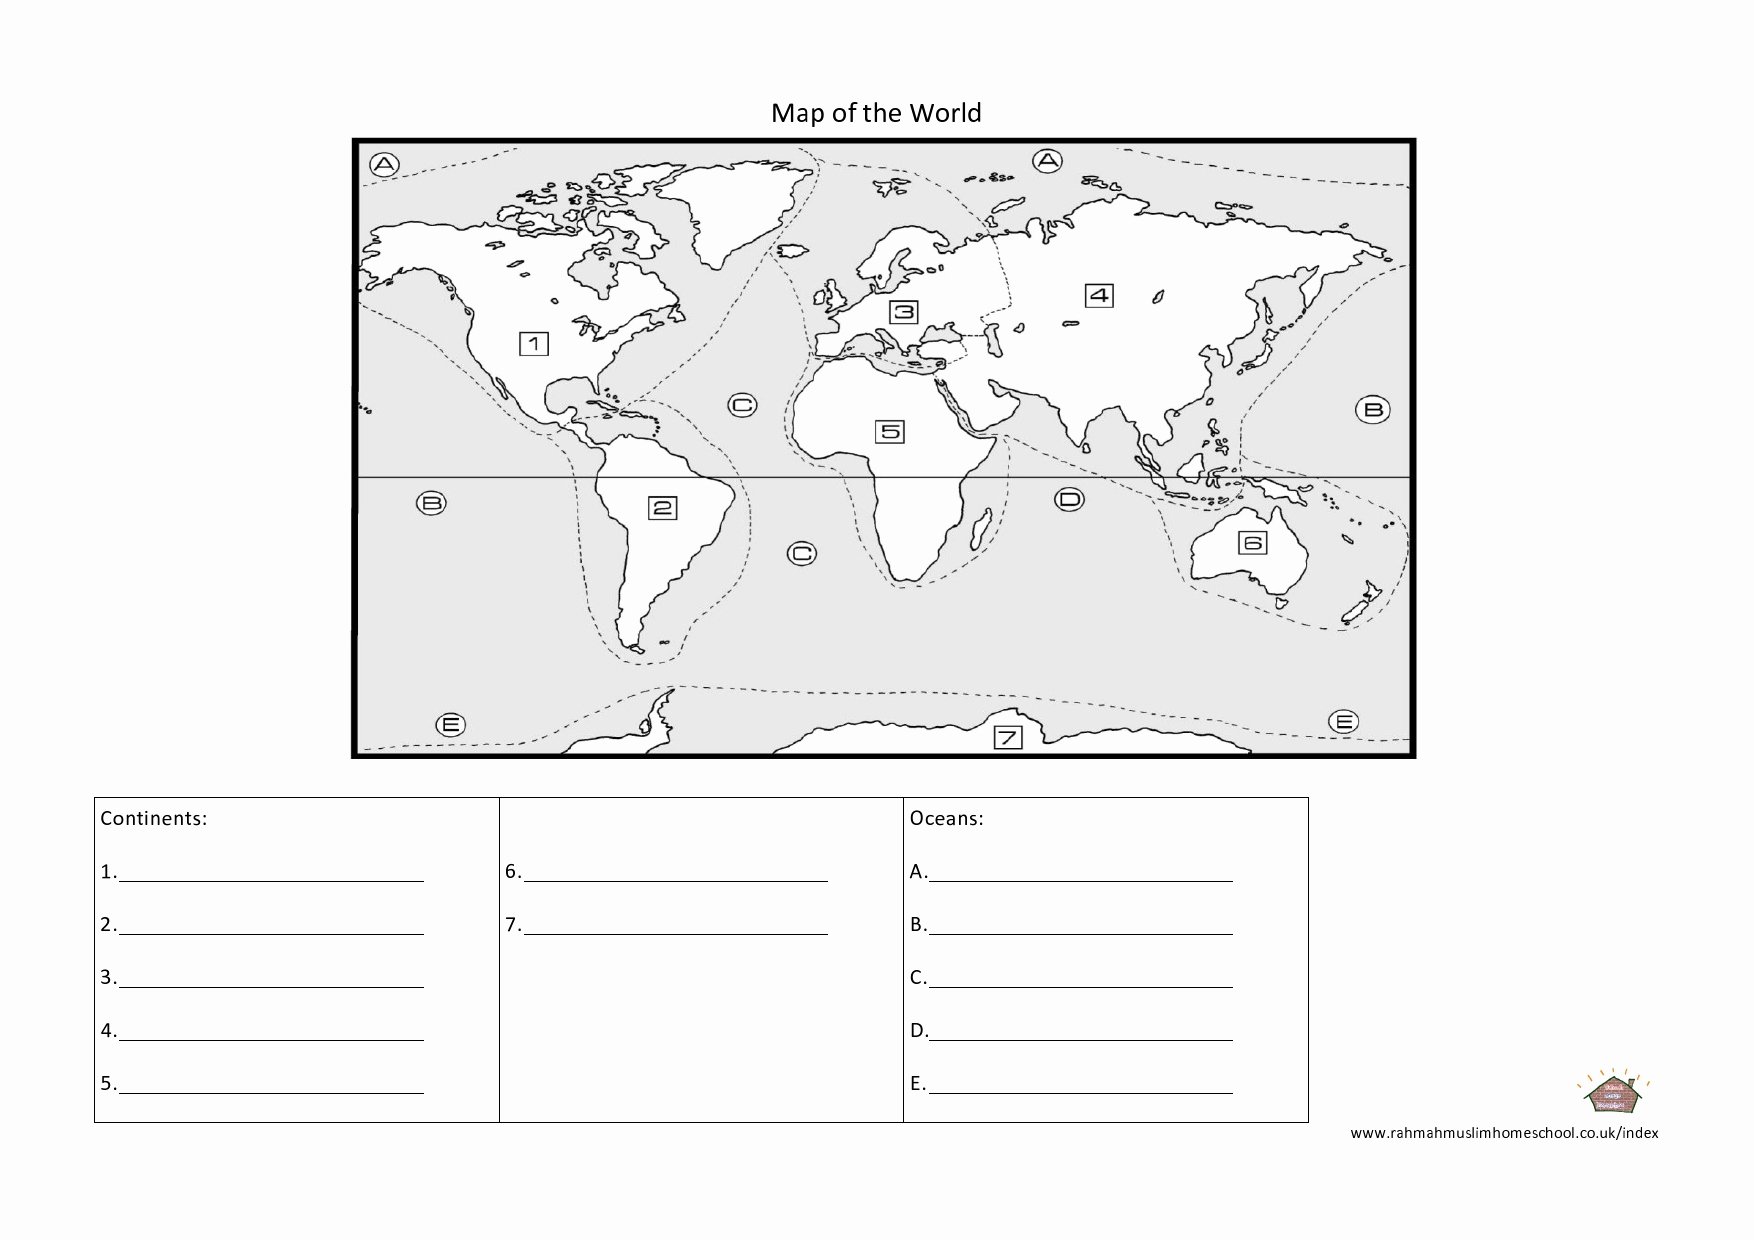 Continents and Oceans Worksheet Pdf New 7 Continents and 4 Oceans Worksheet